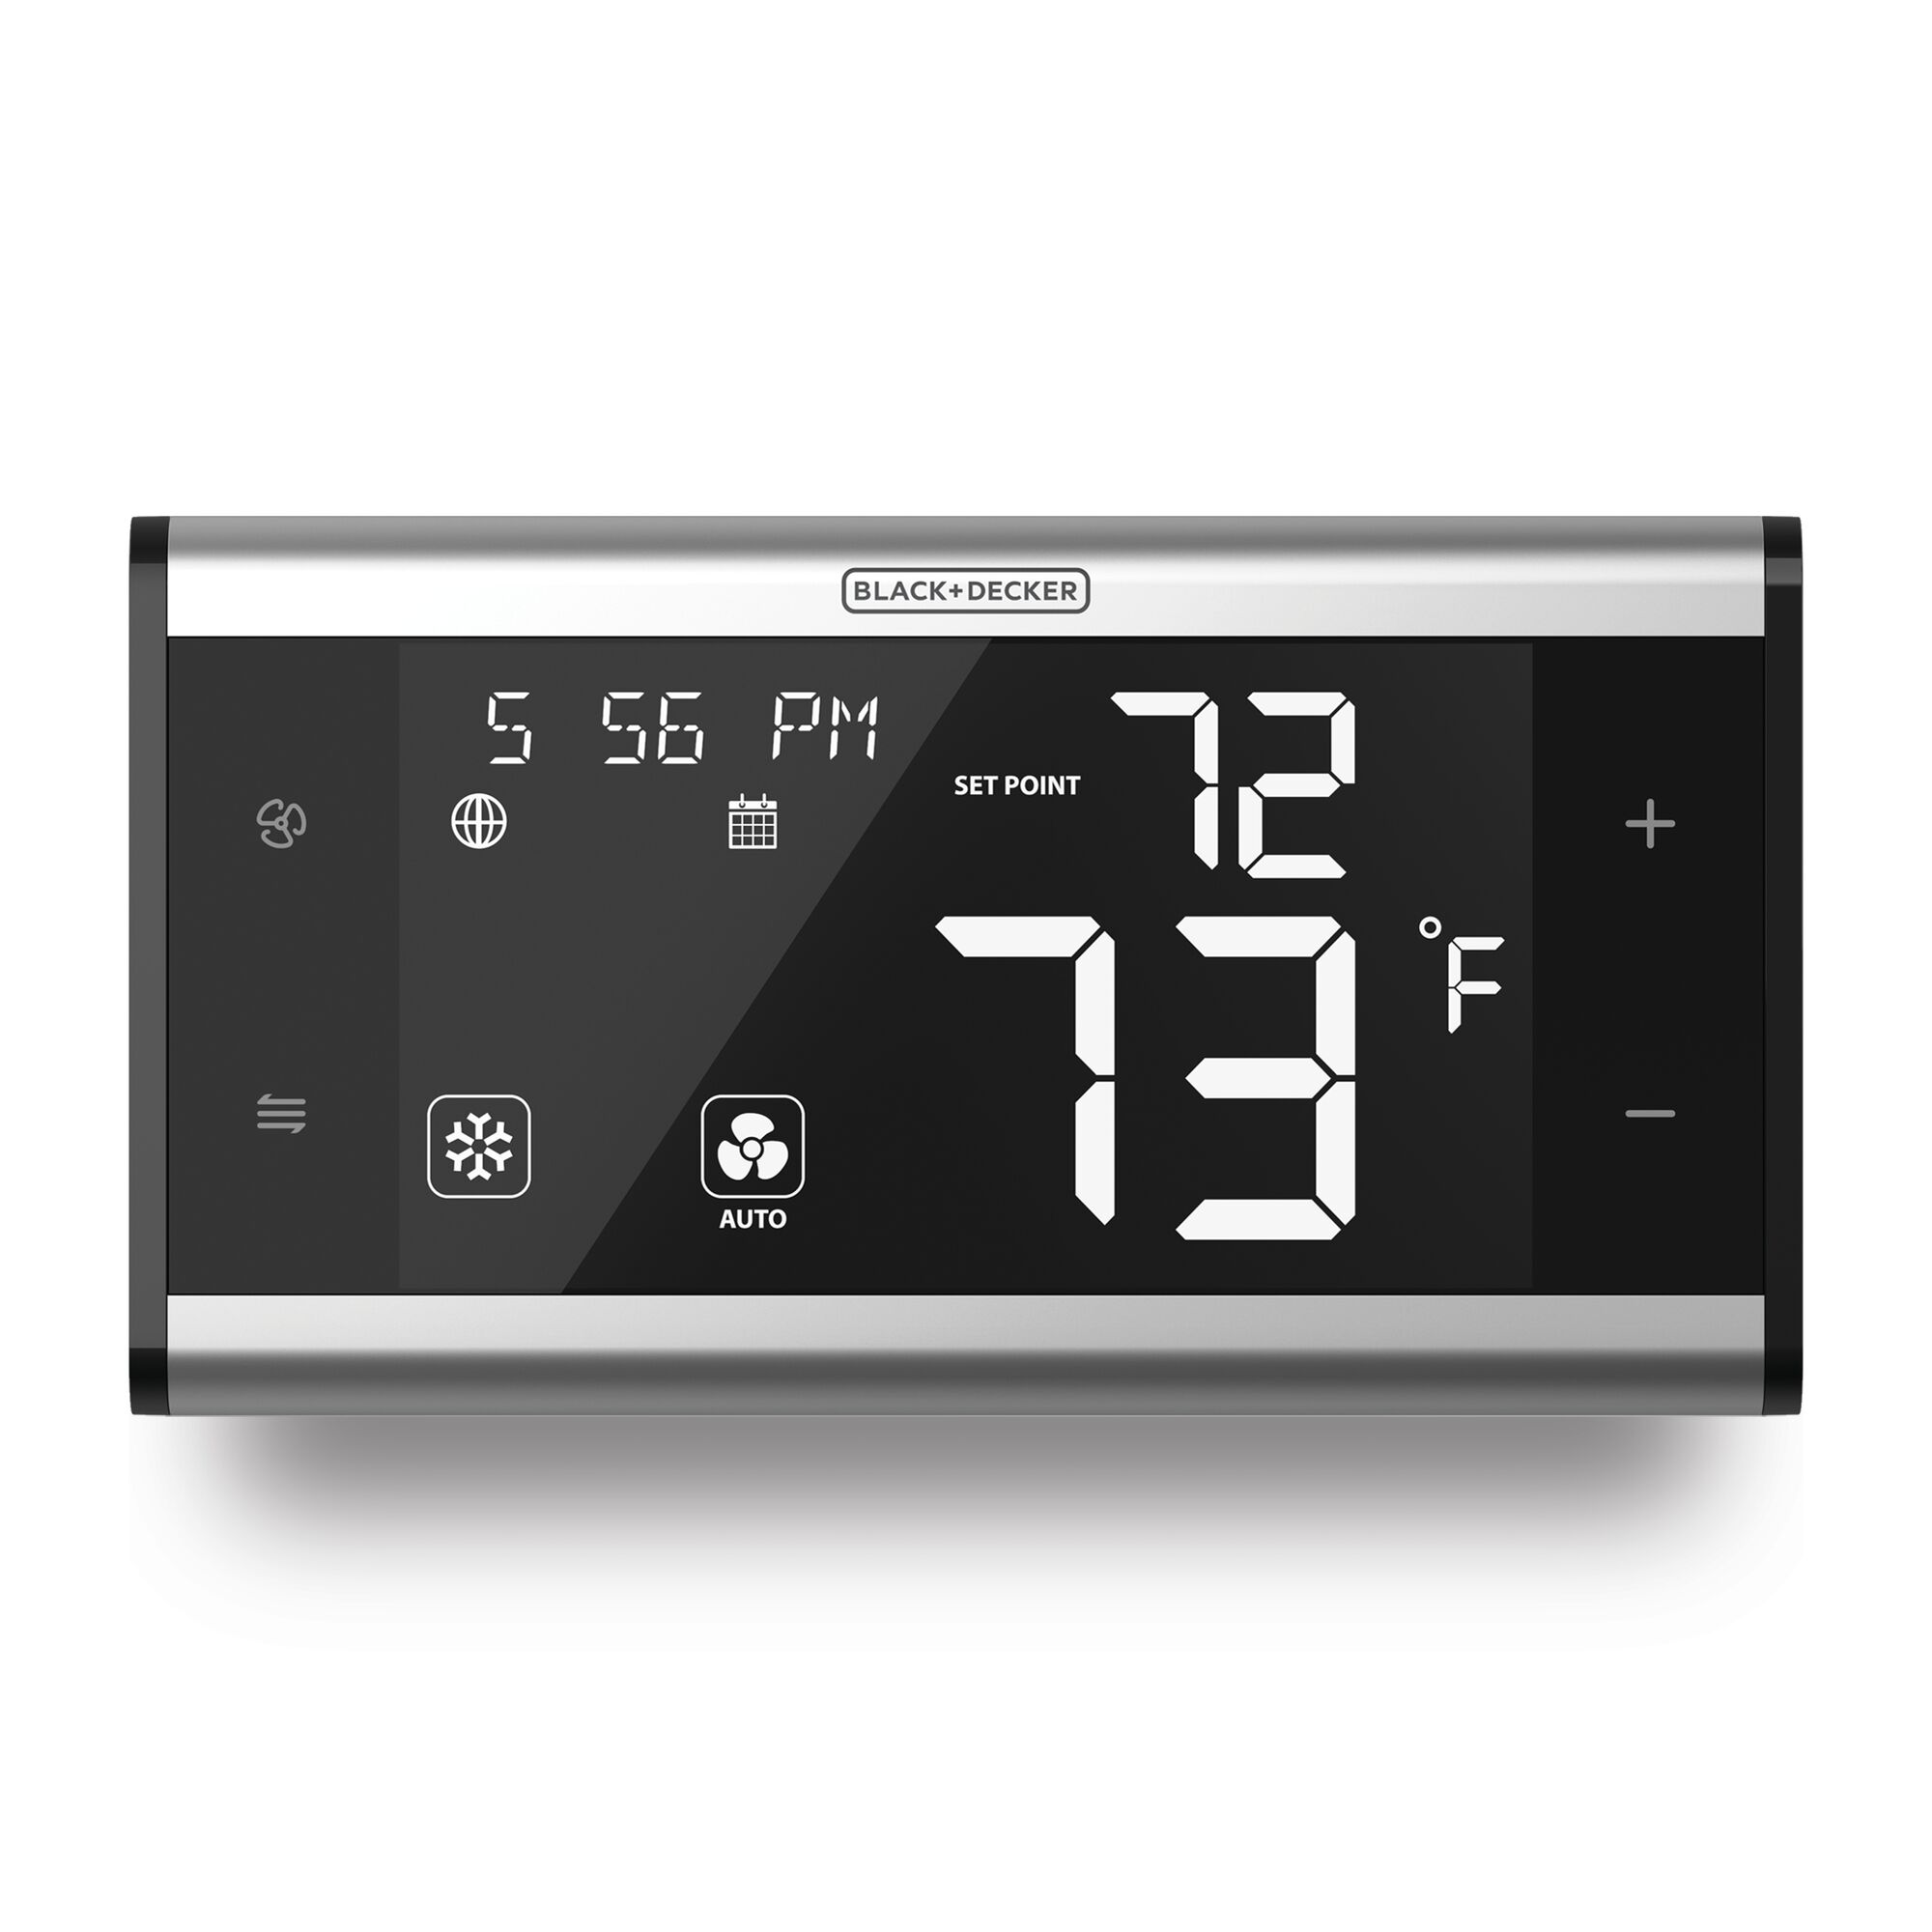 Digital display of the BLACK+DECKER Thermostat Pro showing white numbers on a black screen